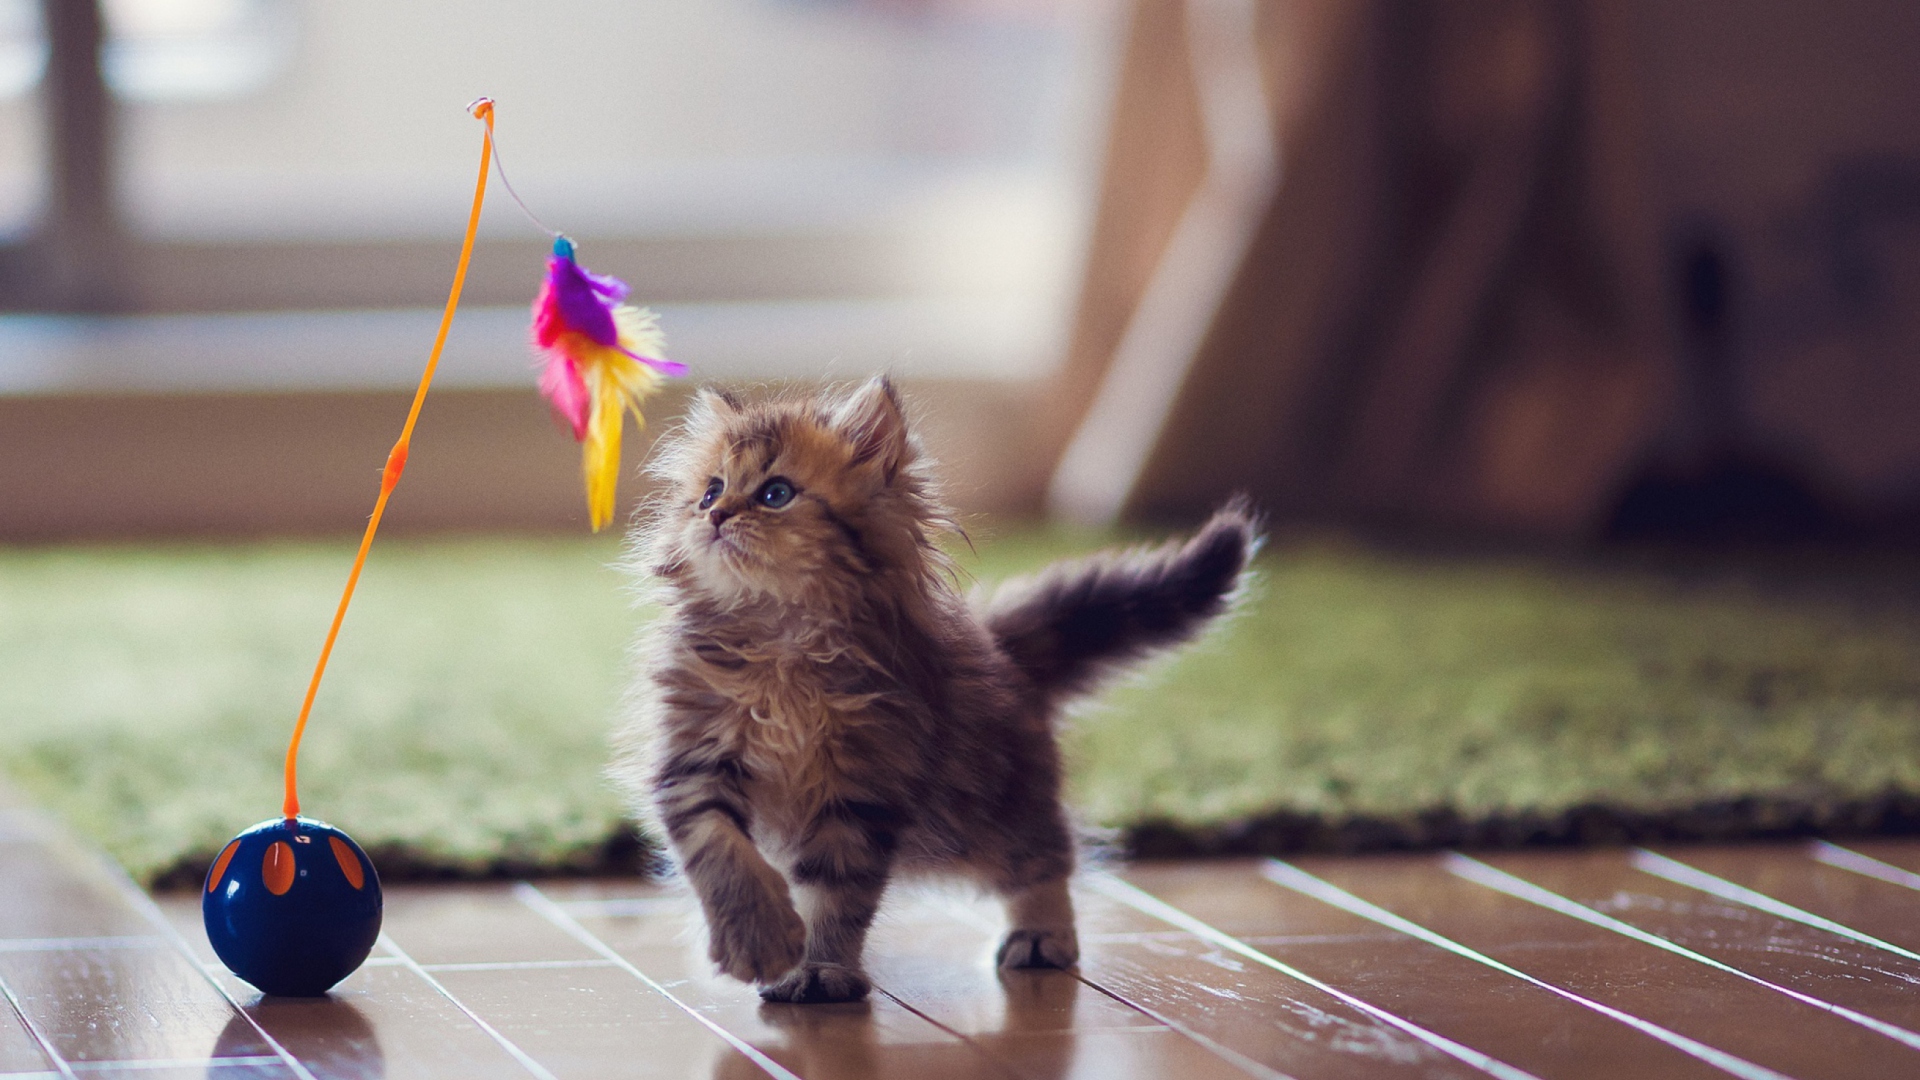 Kitten And Feather wallpaper 1920x1080